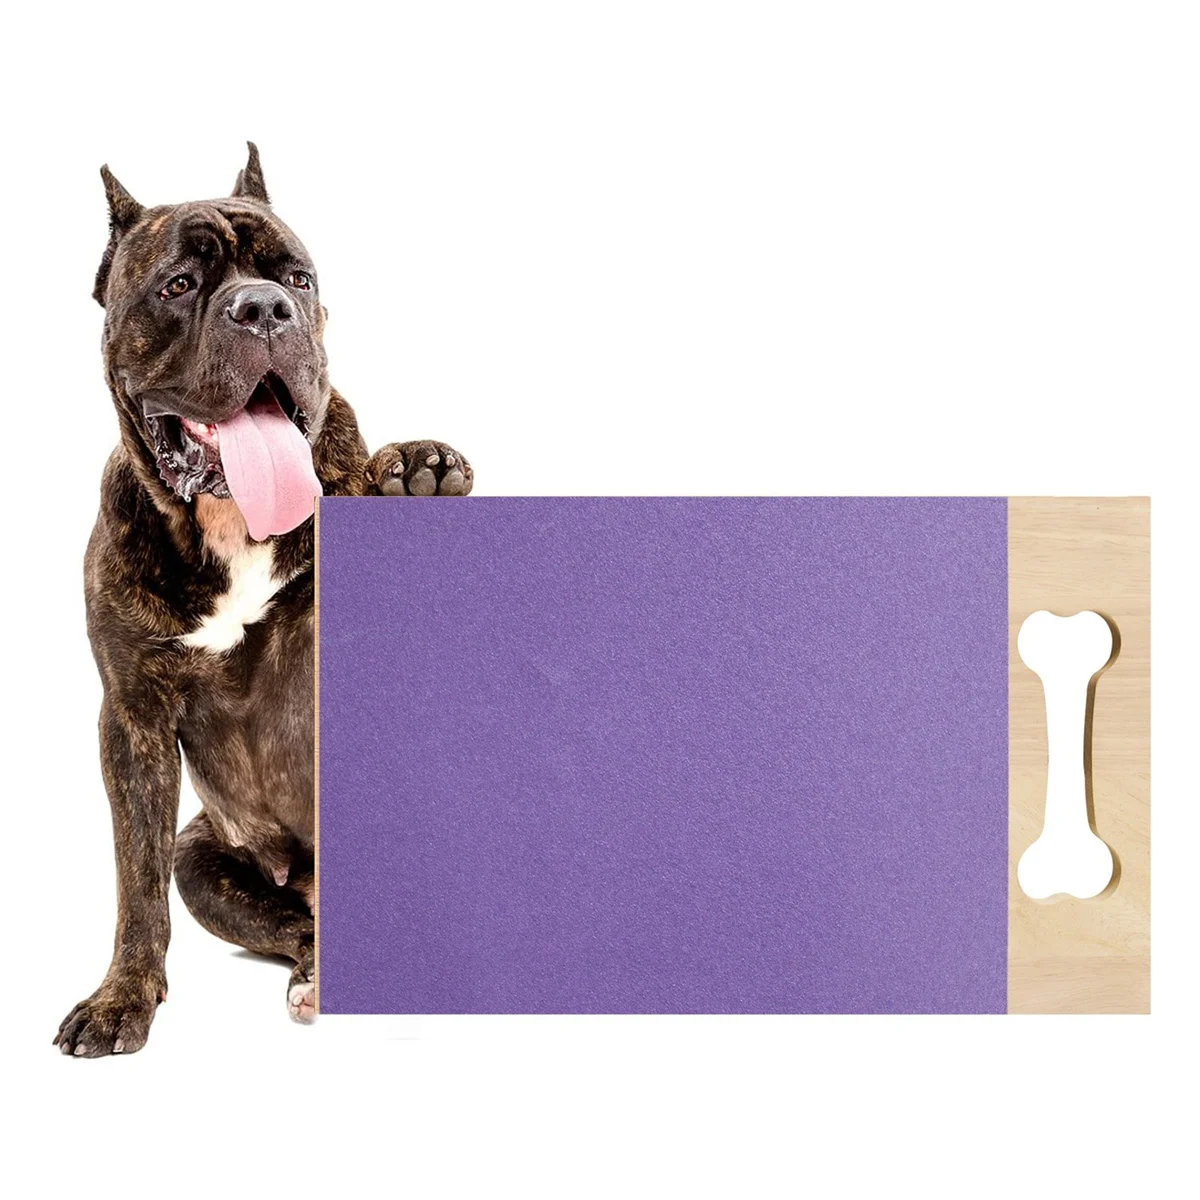 

Dog Scratch Pad for Nails with Treat BoxSnack Box Scratch Board for Dog Dog Nail Grinding Trainer for Grind Nails Purple